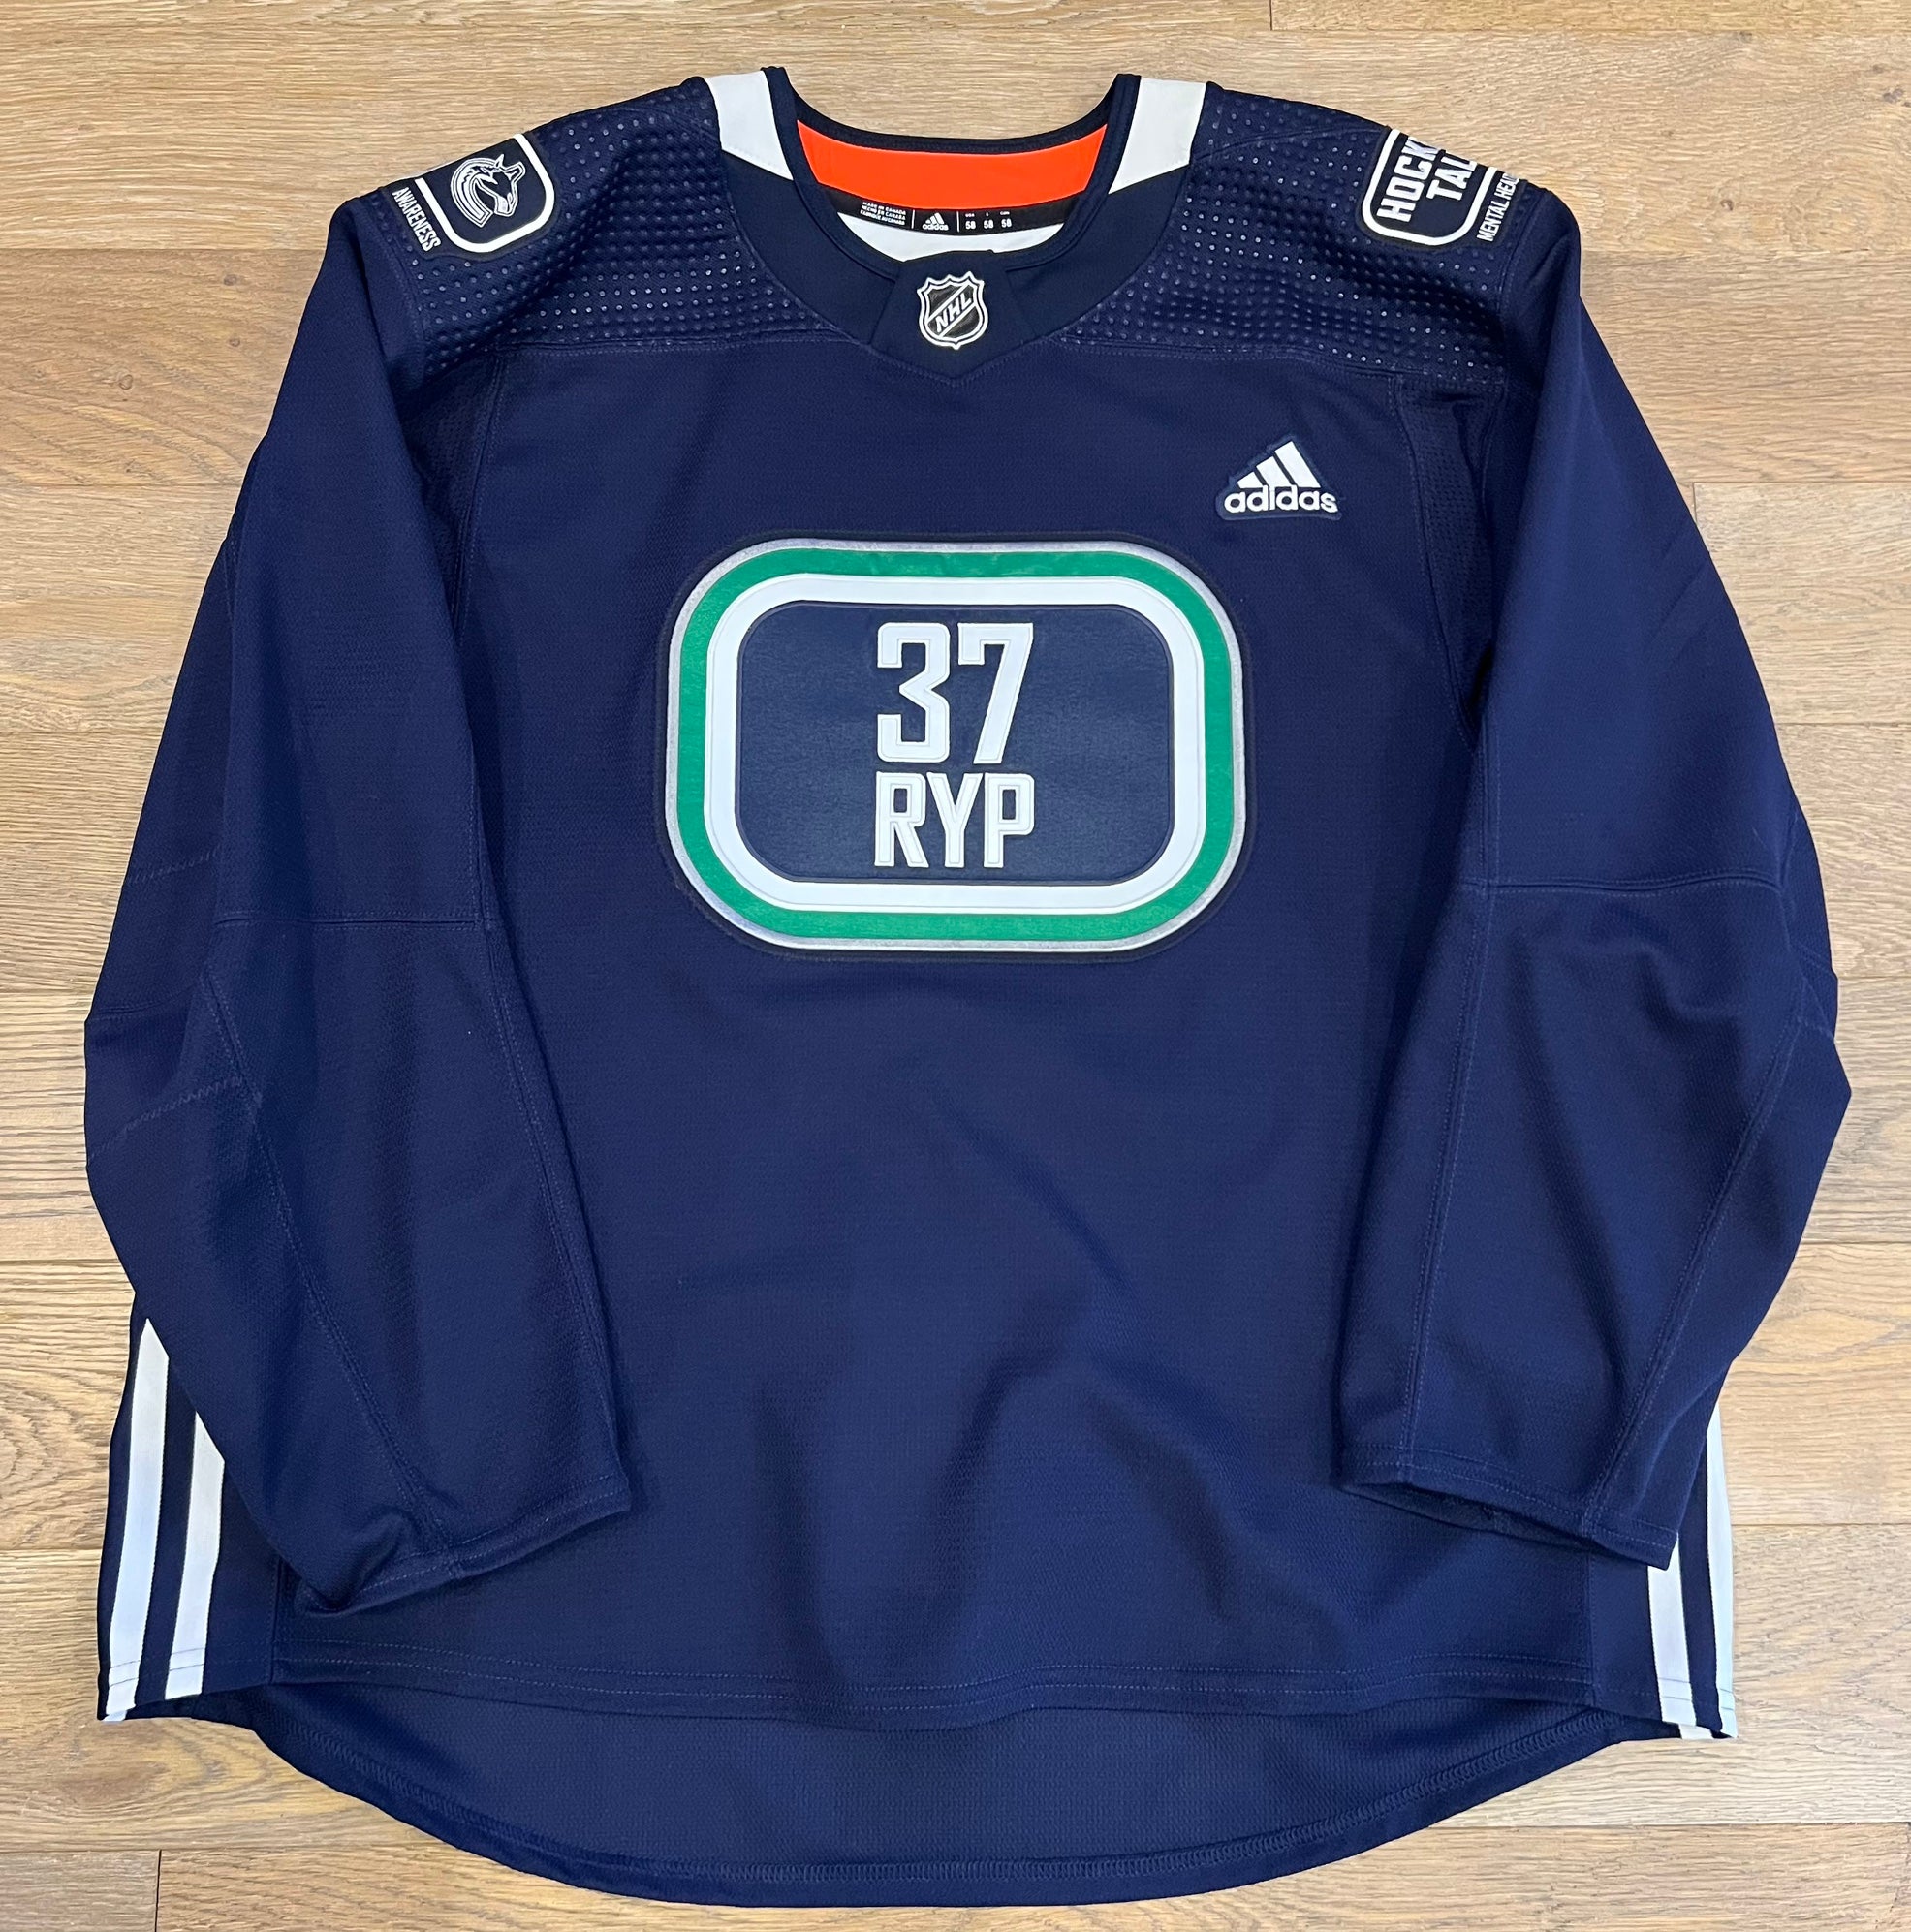 NWT Adidas Vancouver Canucks Elias Pettersson Authentic Pro Hockey Jersey  SZ 52